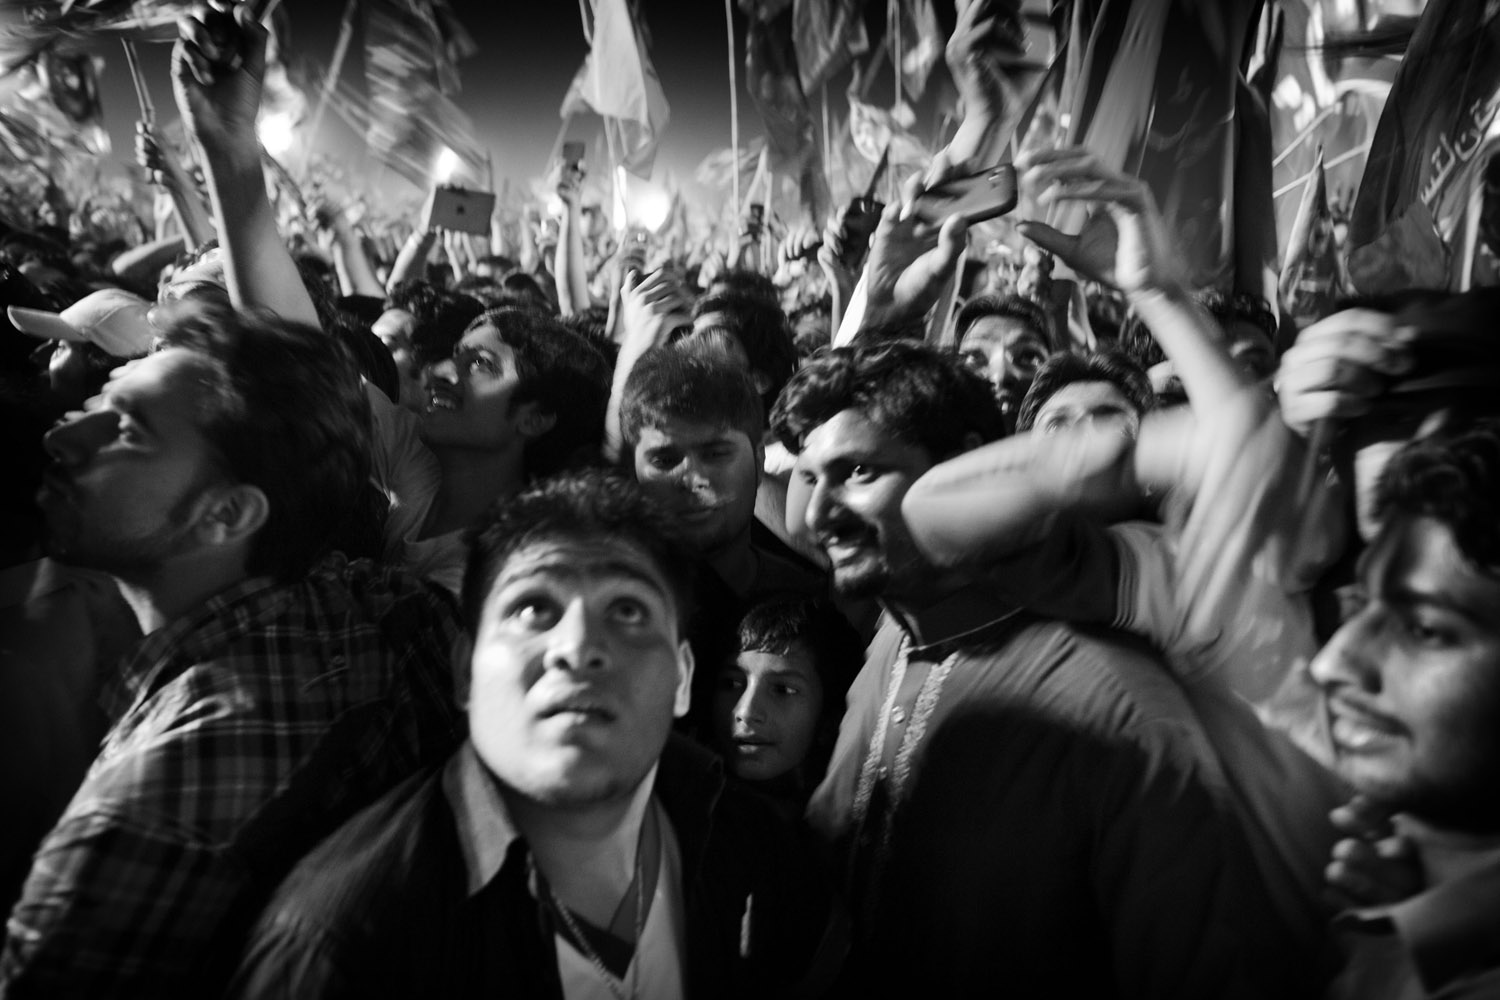 May 6, 2013. Supporters of Imran Khan listen to his speech in Jinna cricket stadium in Sialkot.